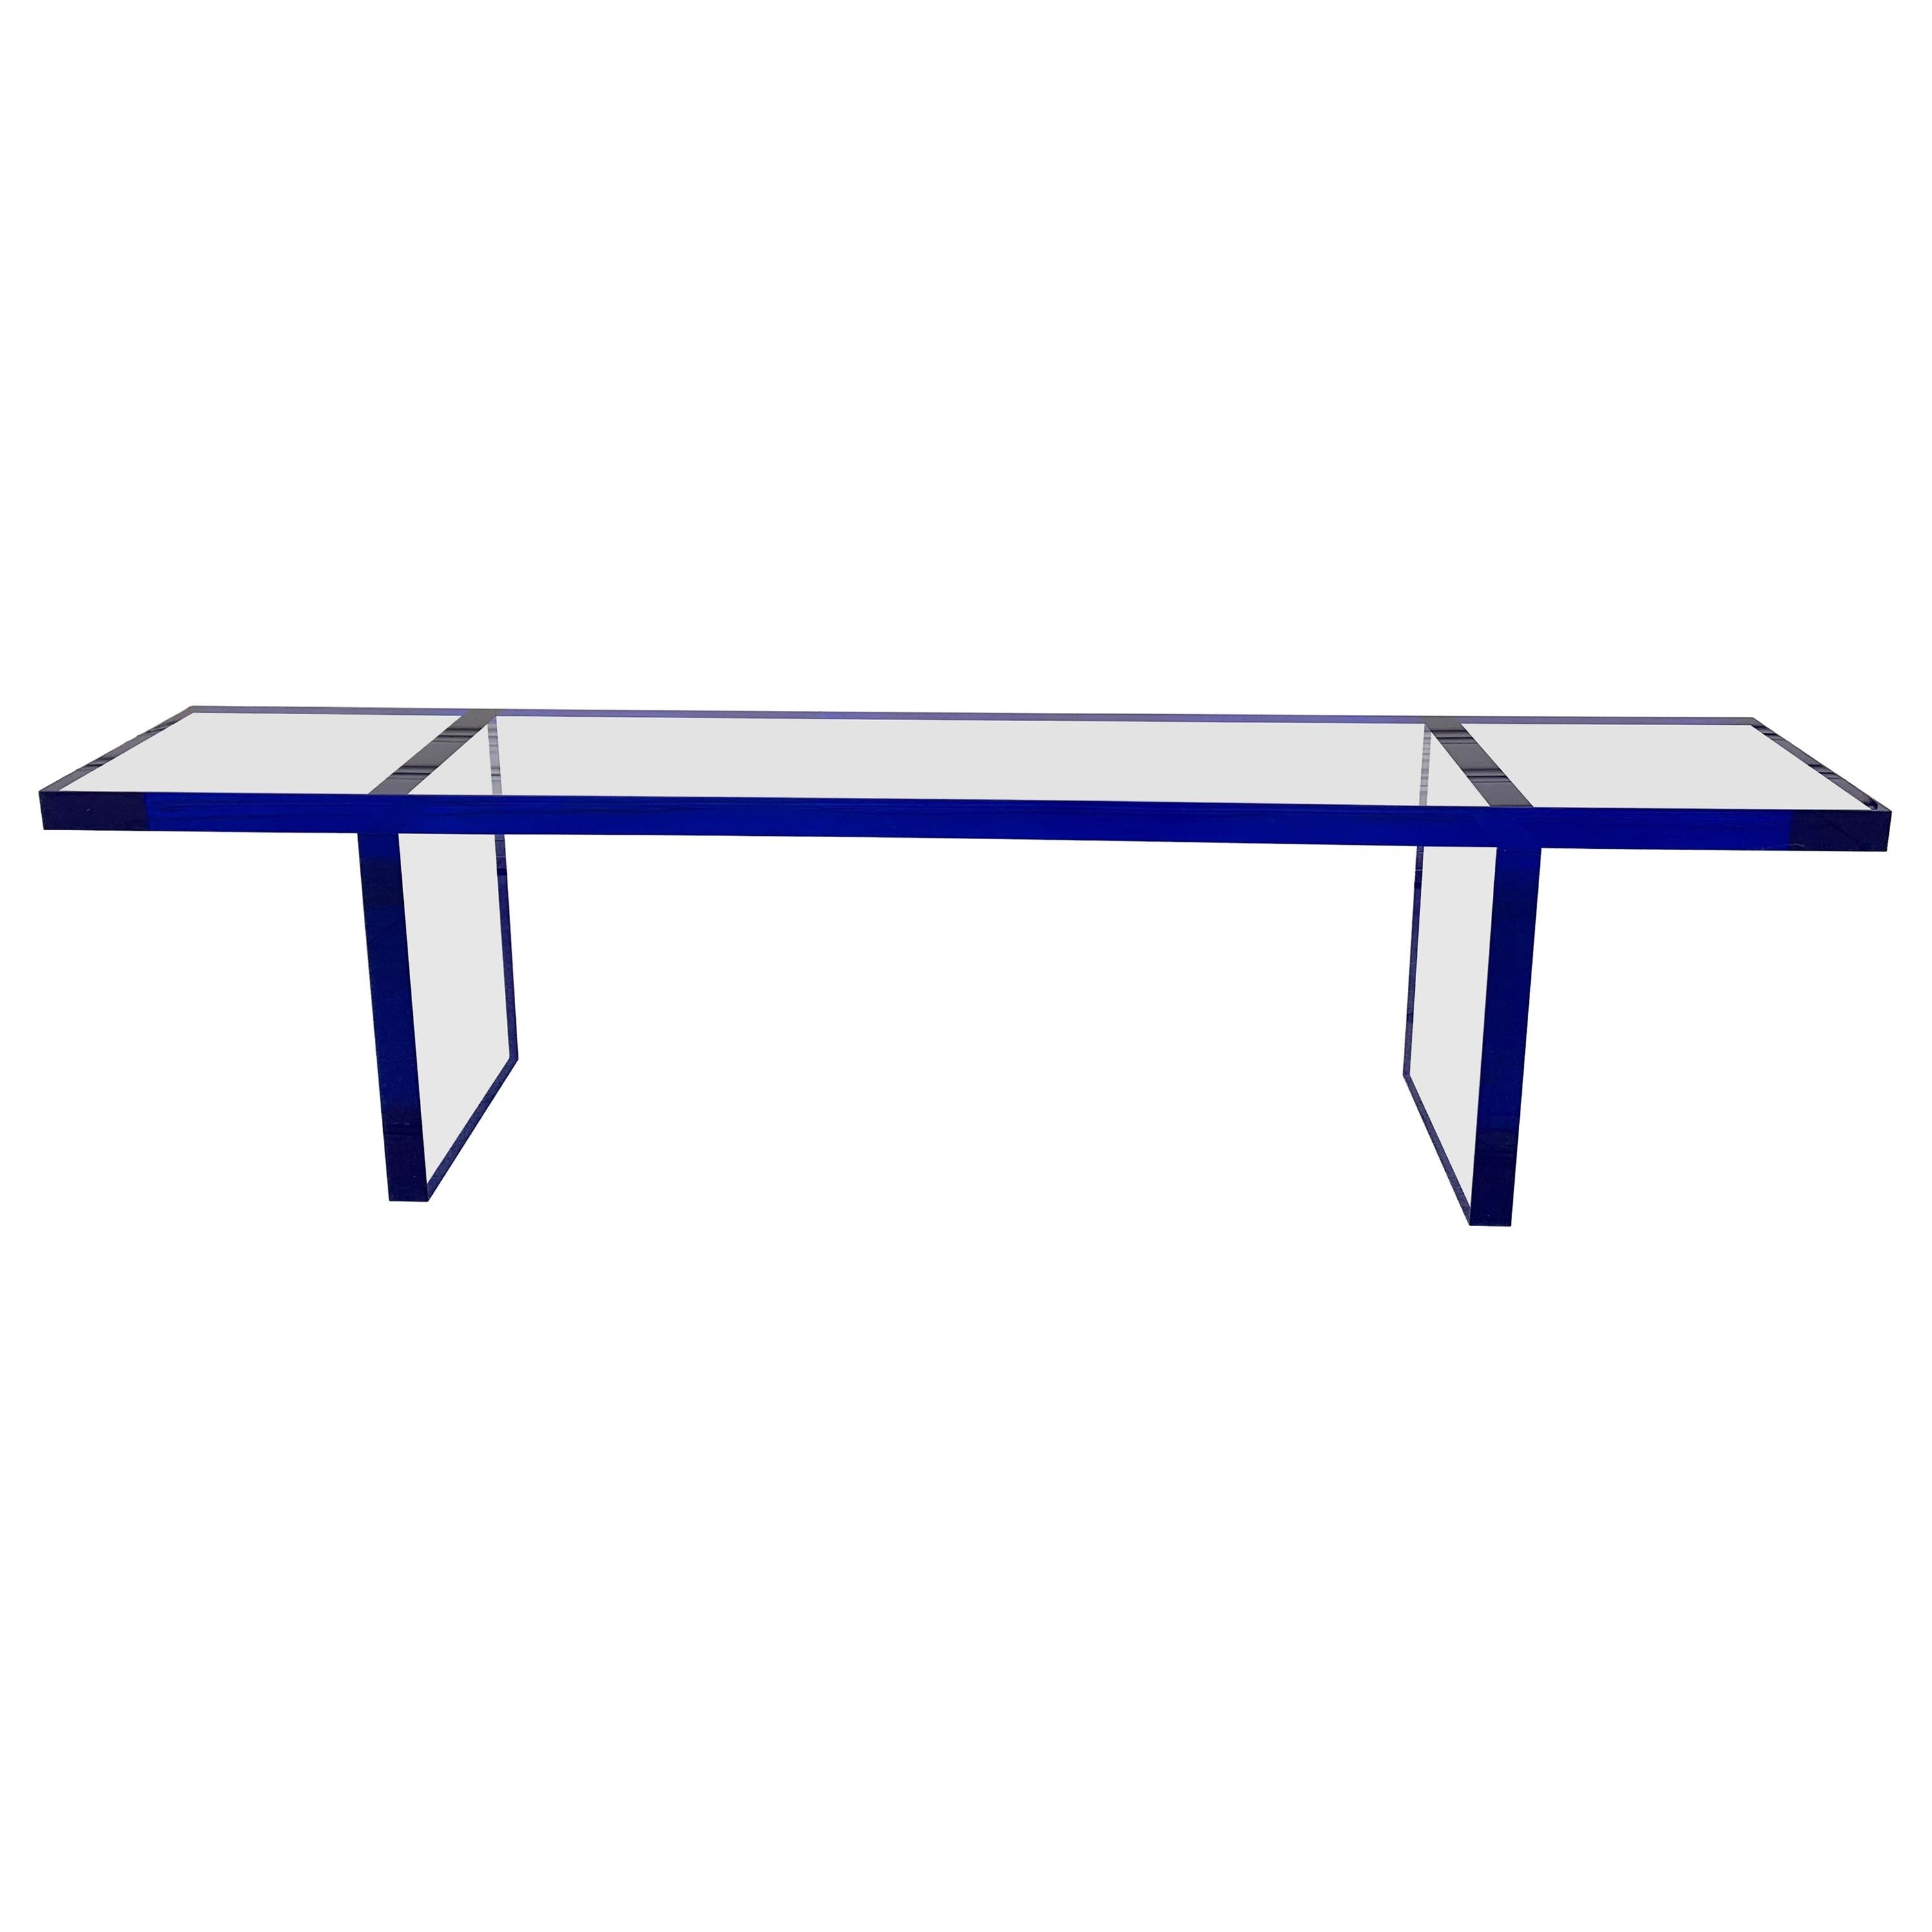 Custom Bench in Deep Blue and Clear Lucite by Amparo Calderon Tapia